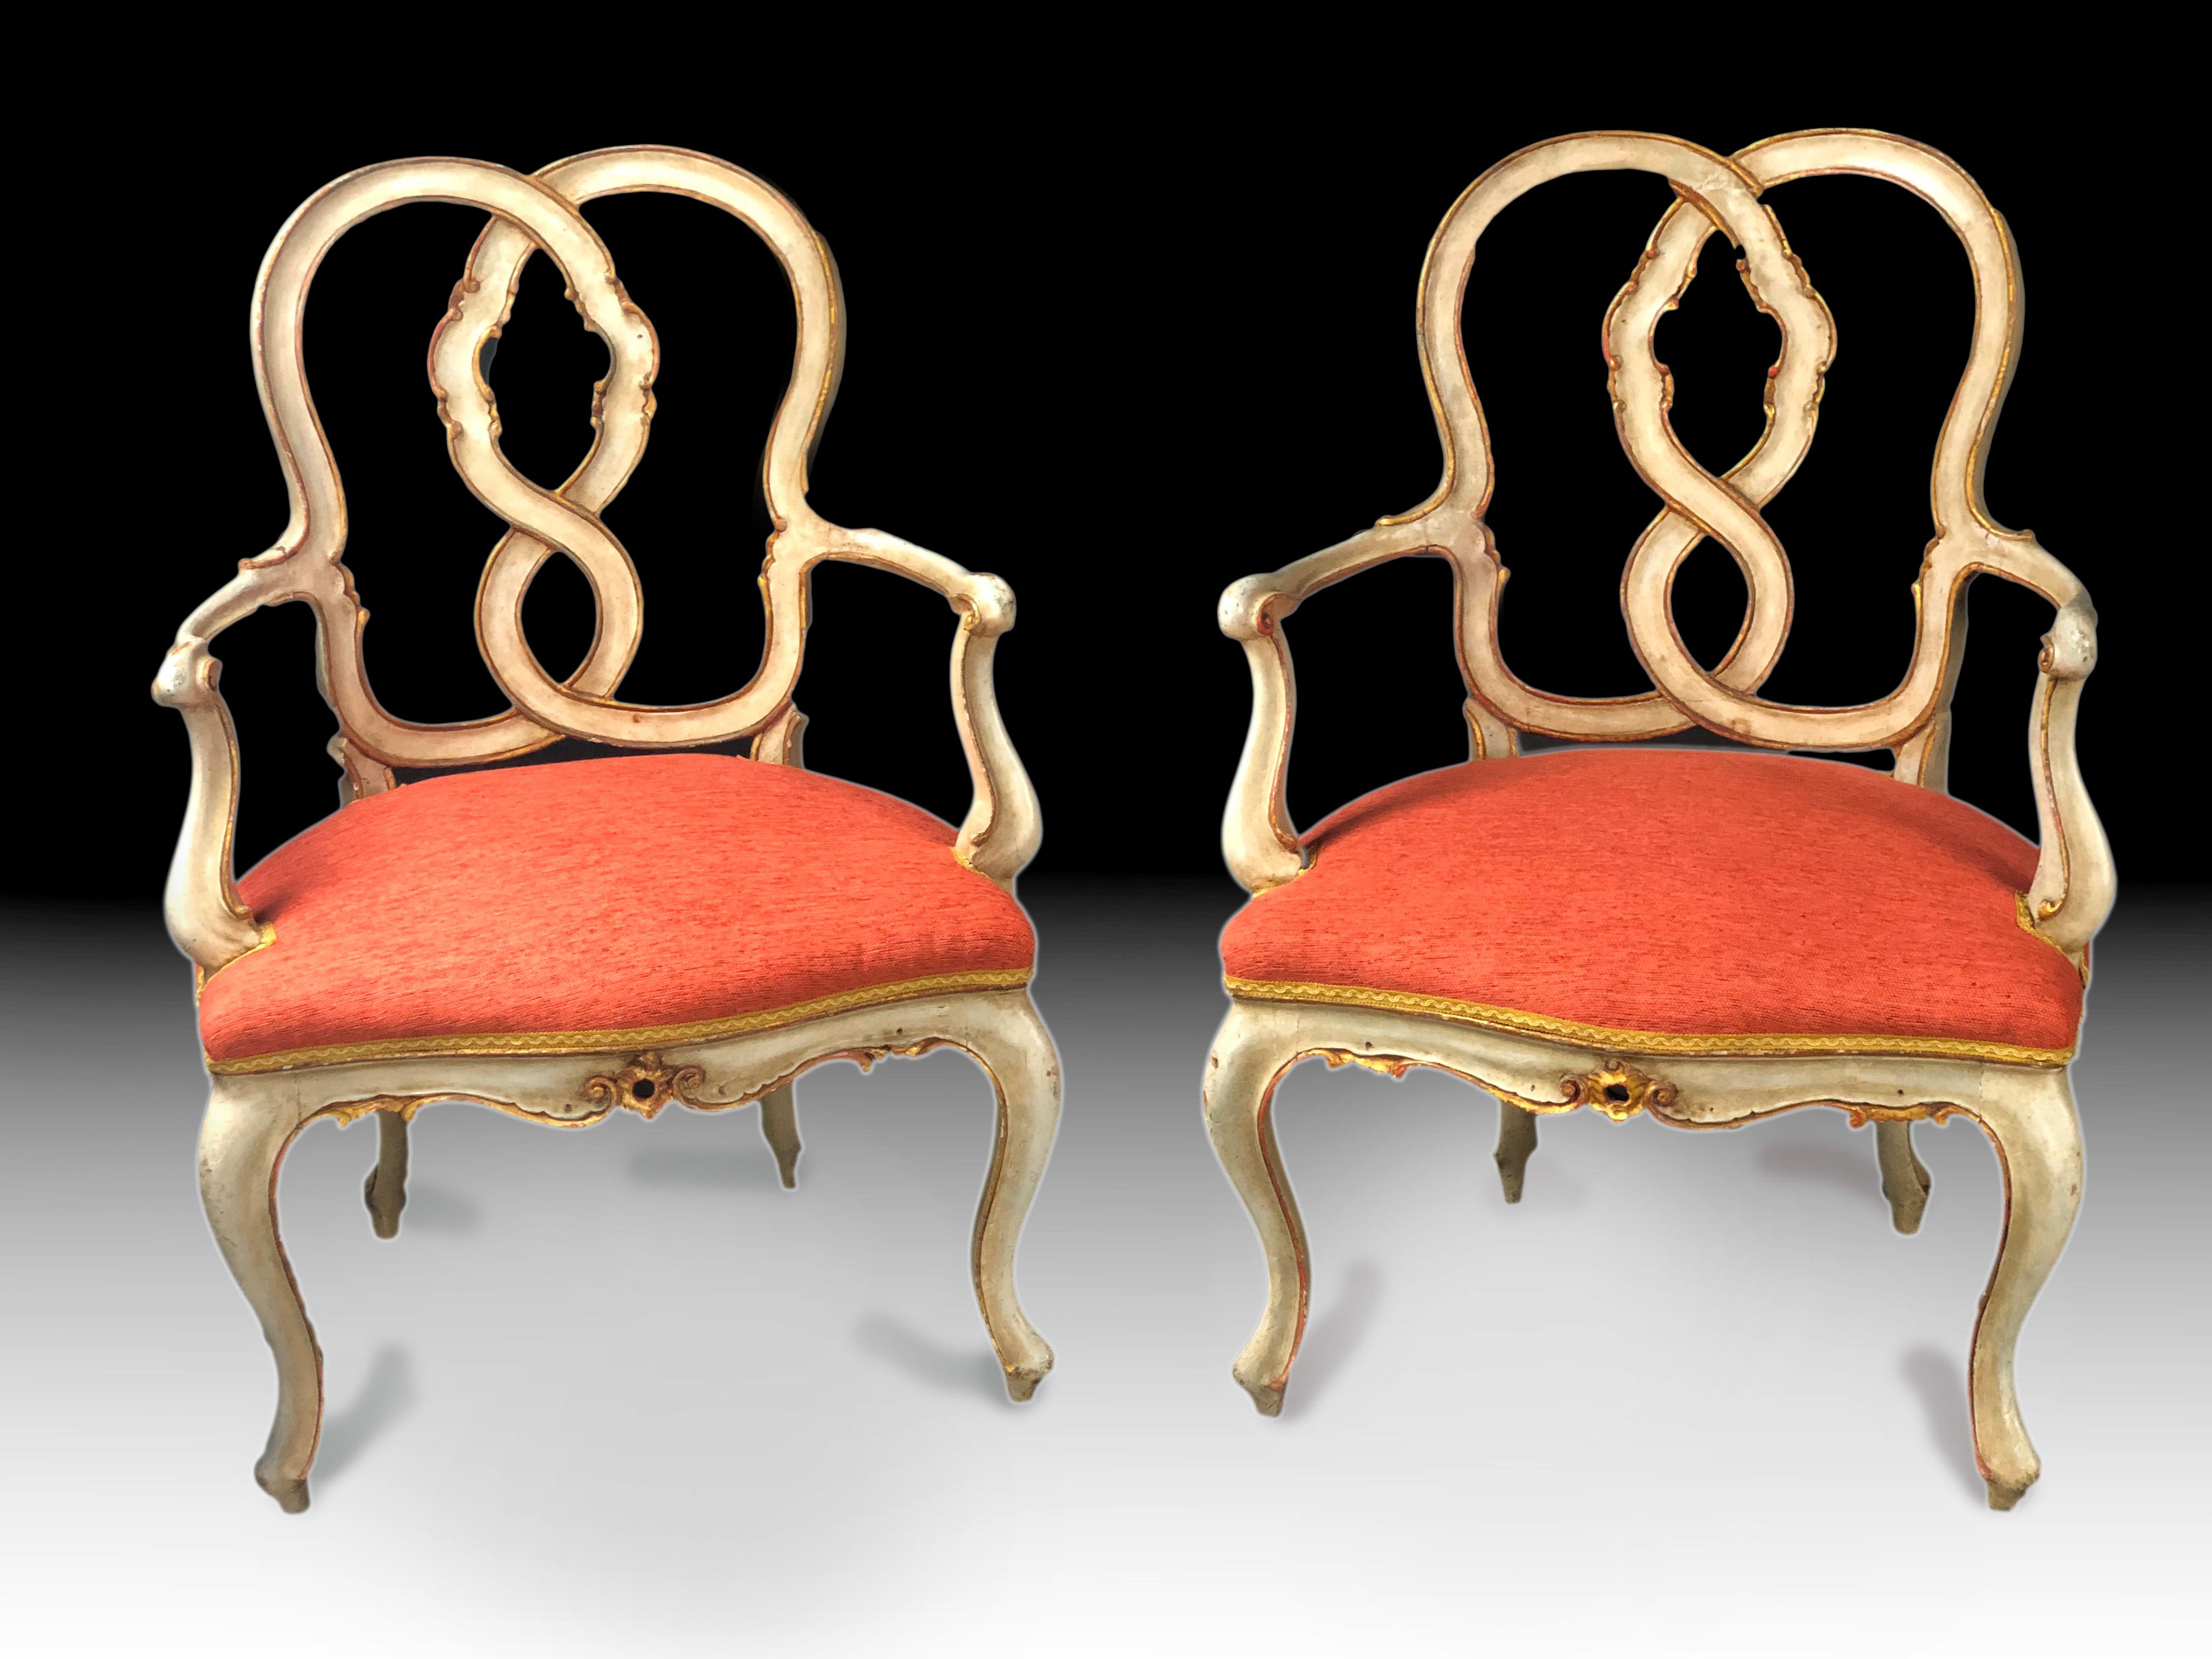 Impressive and rare pair of early 19th century Italian armchairs, most probably Venetian, painted in their original light grey color, parcel gilt and with original patina and wear through their 2 centuries of existence. Their back with interlaced